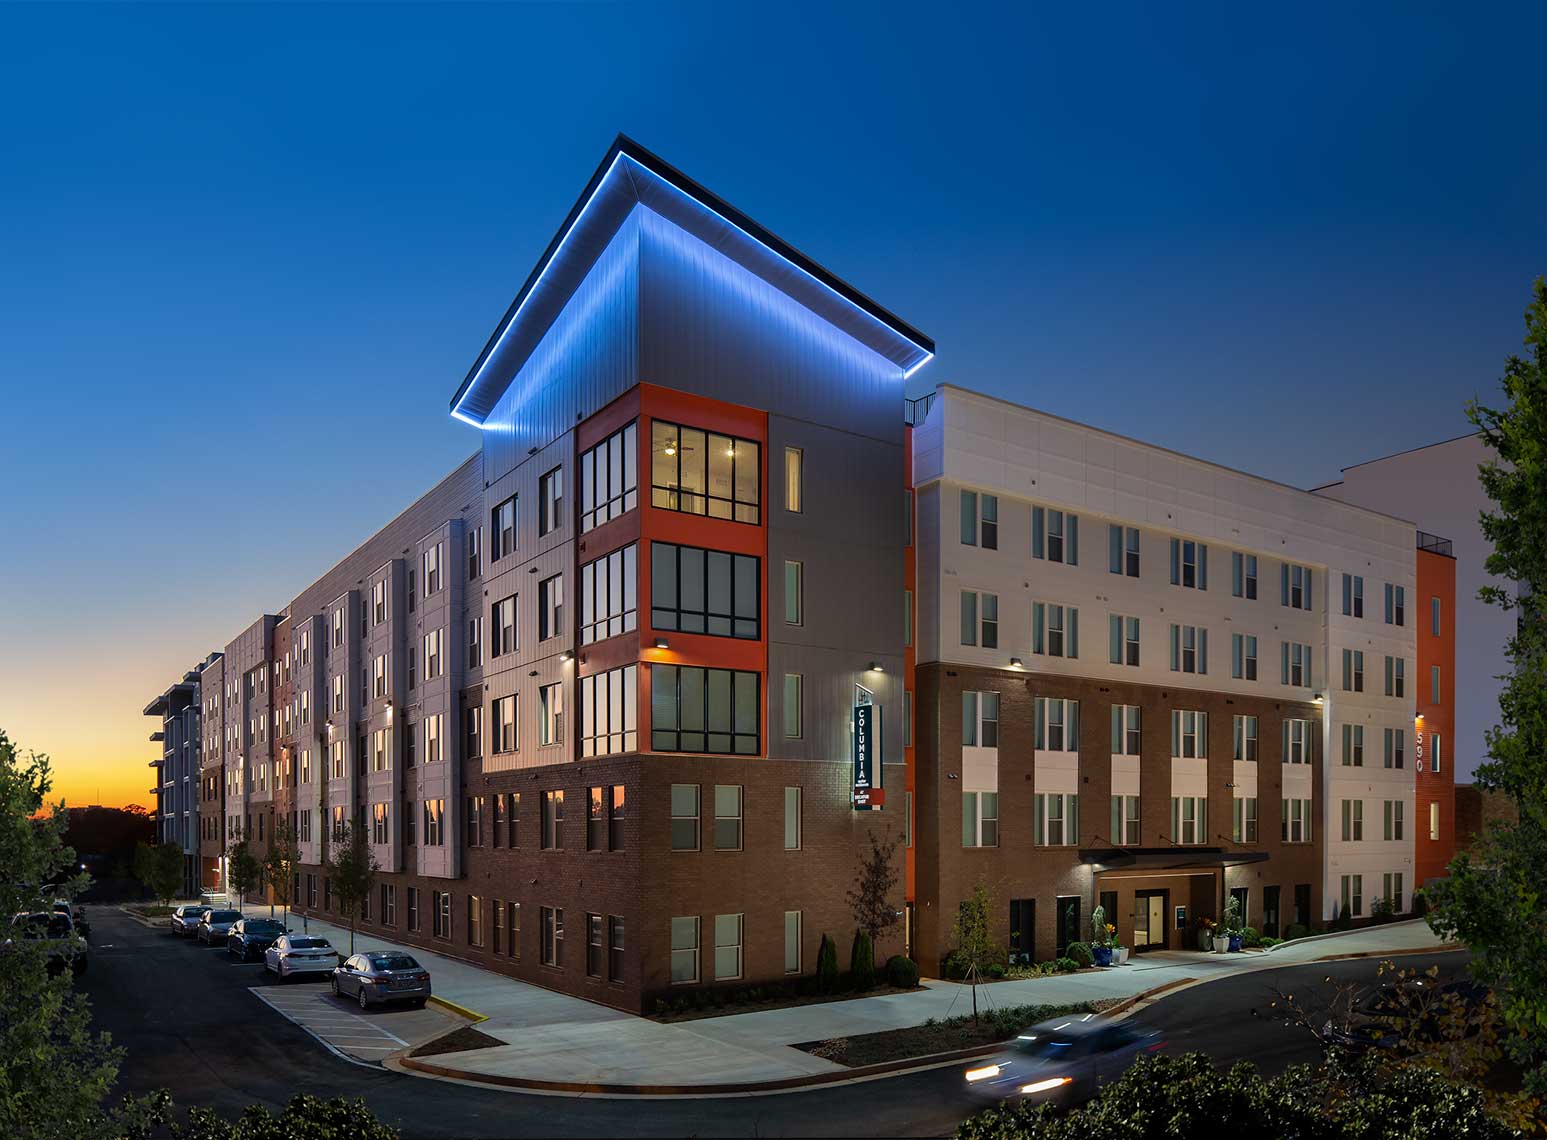 A twilight view showing the bold architecture and lighting at Columbia Senior Residences Avondale